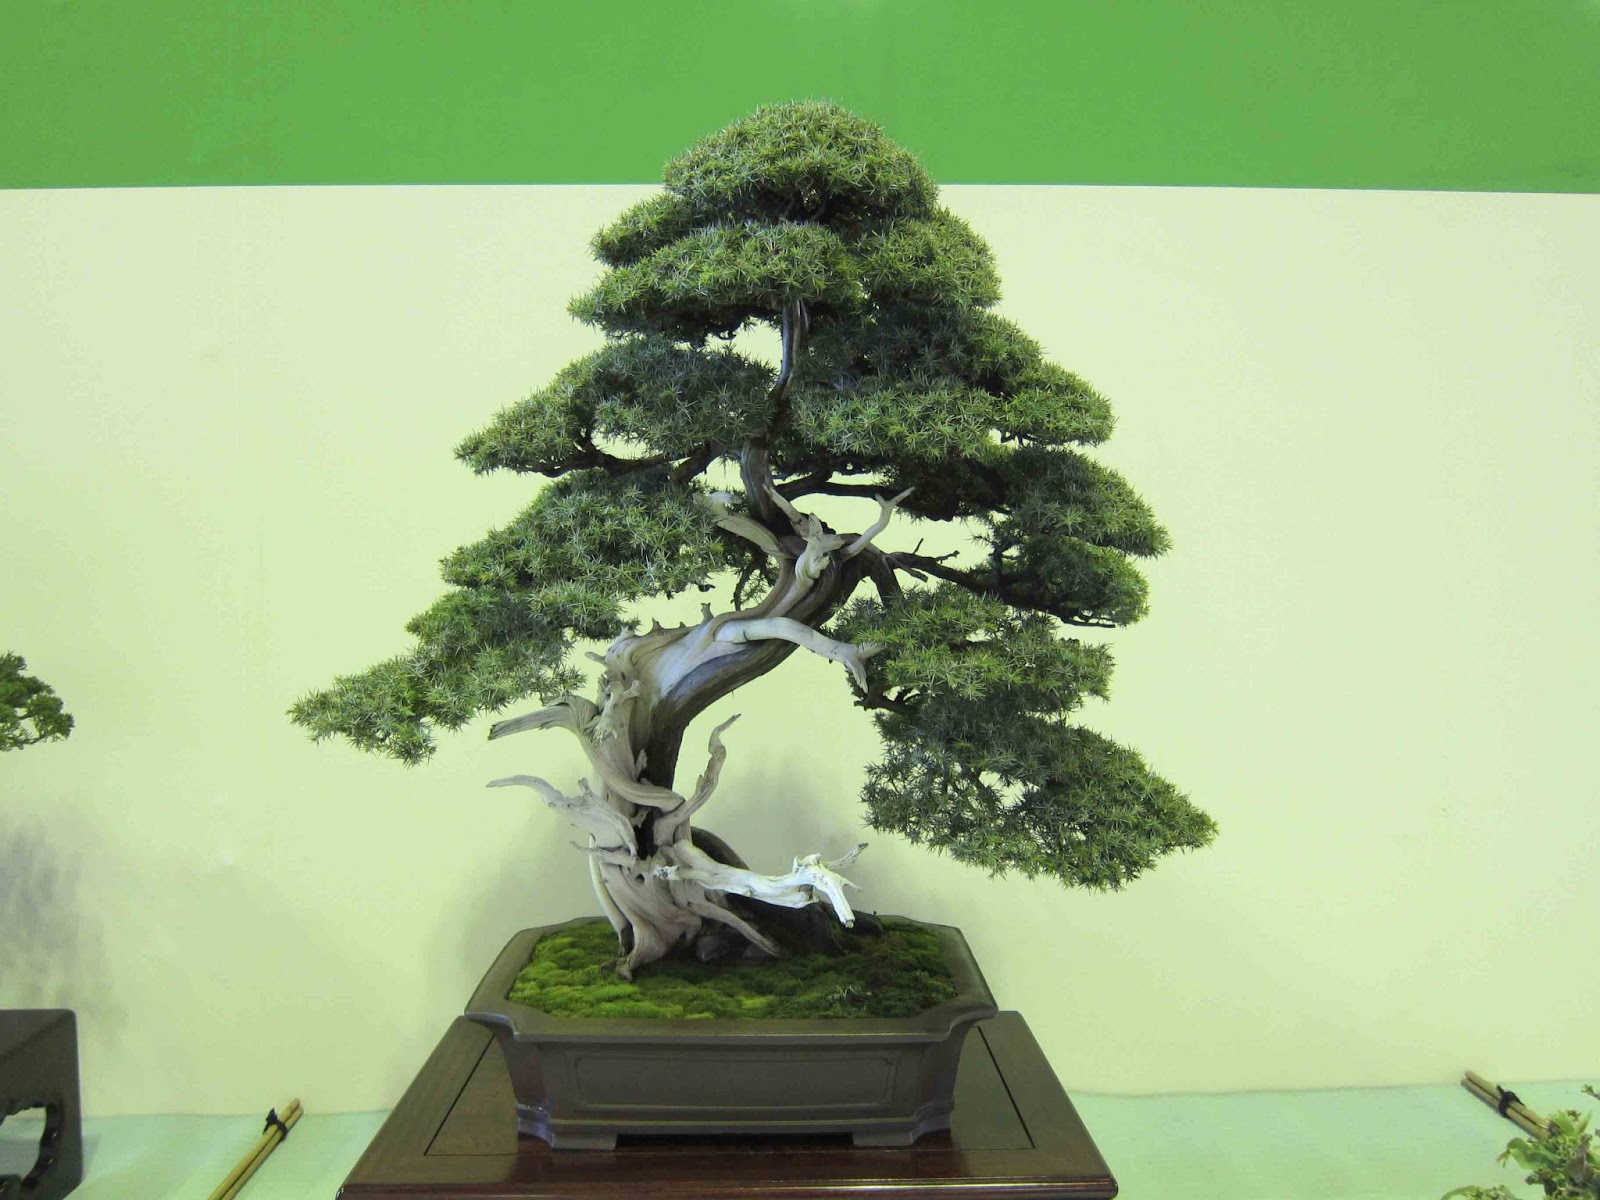 How To Grow And Care For Your Precious Bonsai Tree!